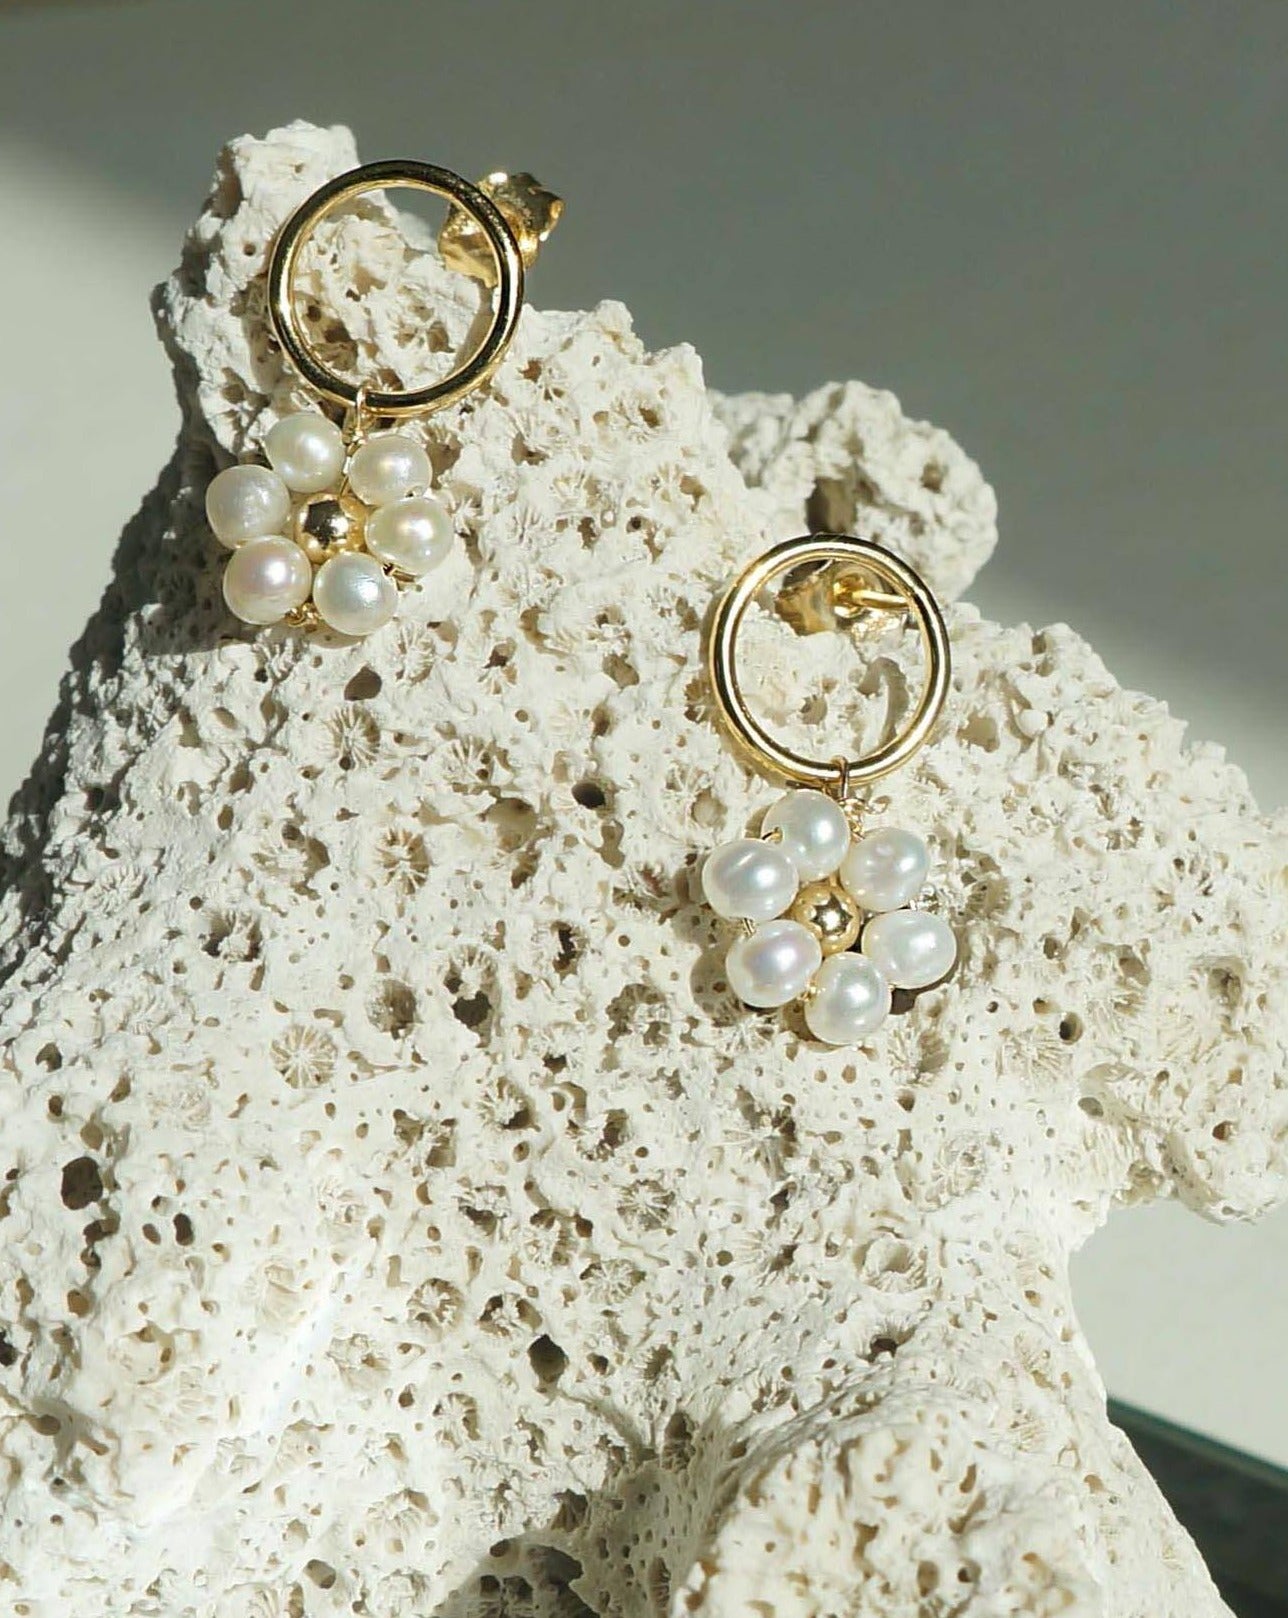 Girasol Earrings by KOZAKH. 10mm circle studs, crafted in 14K Gold Filled, featuring 3-4mm round freshwater Pearls forming a daisy.